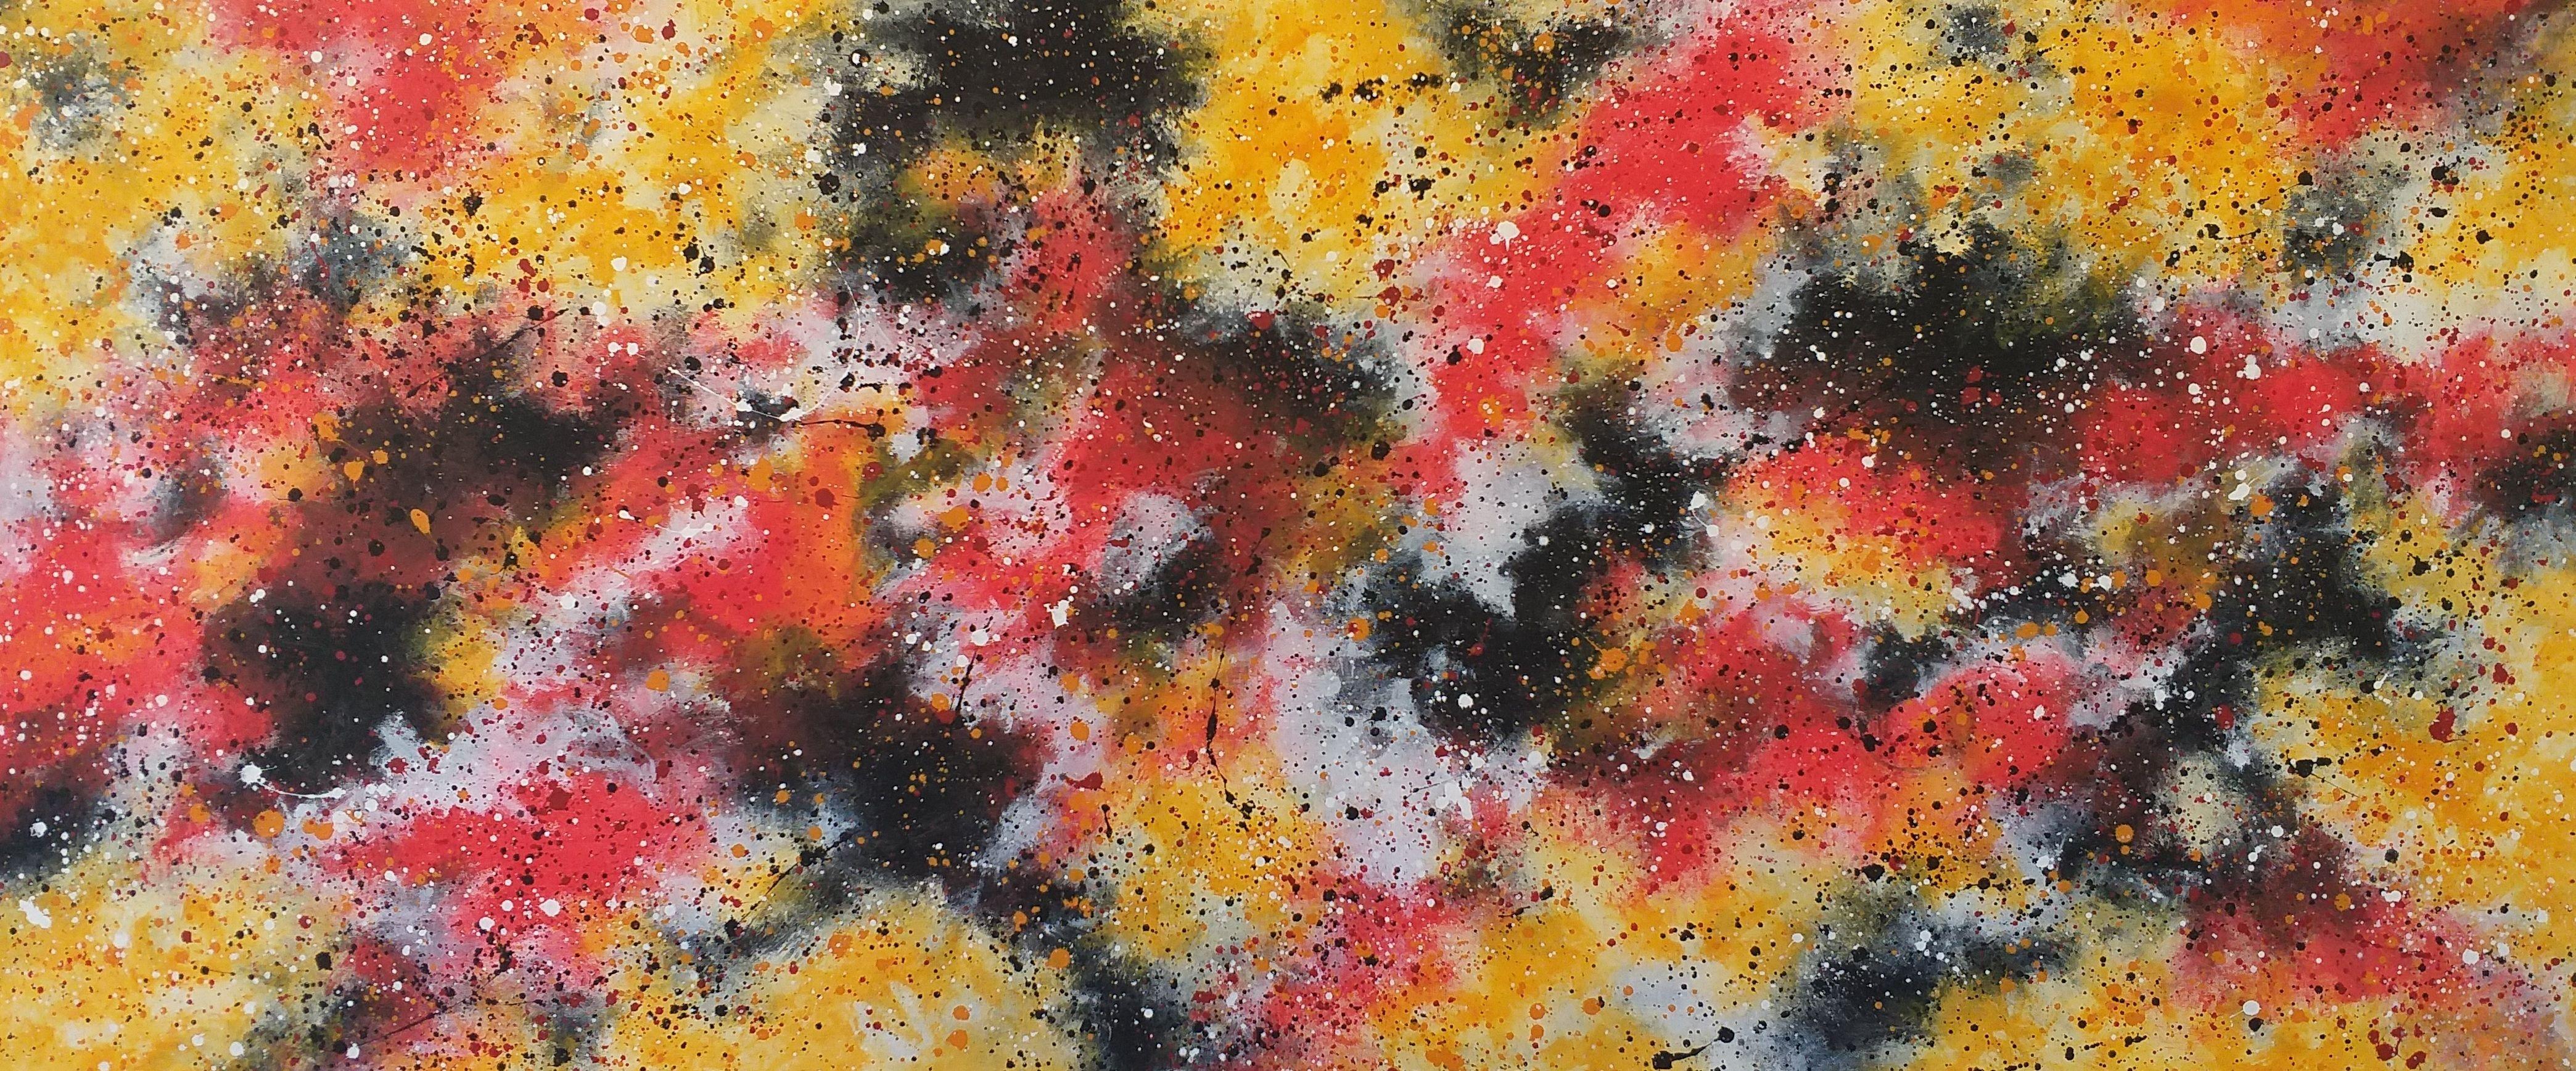 Max Yaskin Abstract Painting - Â« Space 2 Â» by M.Y., Painting, Acrylic on Canvas